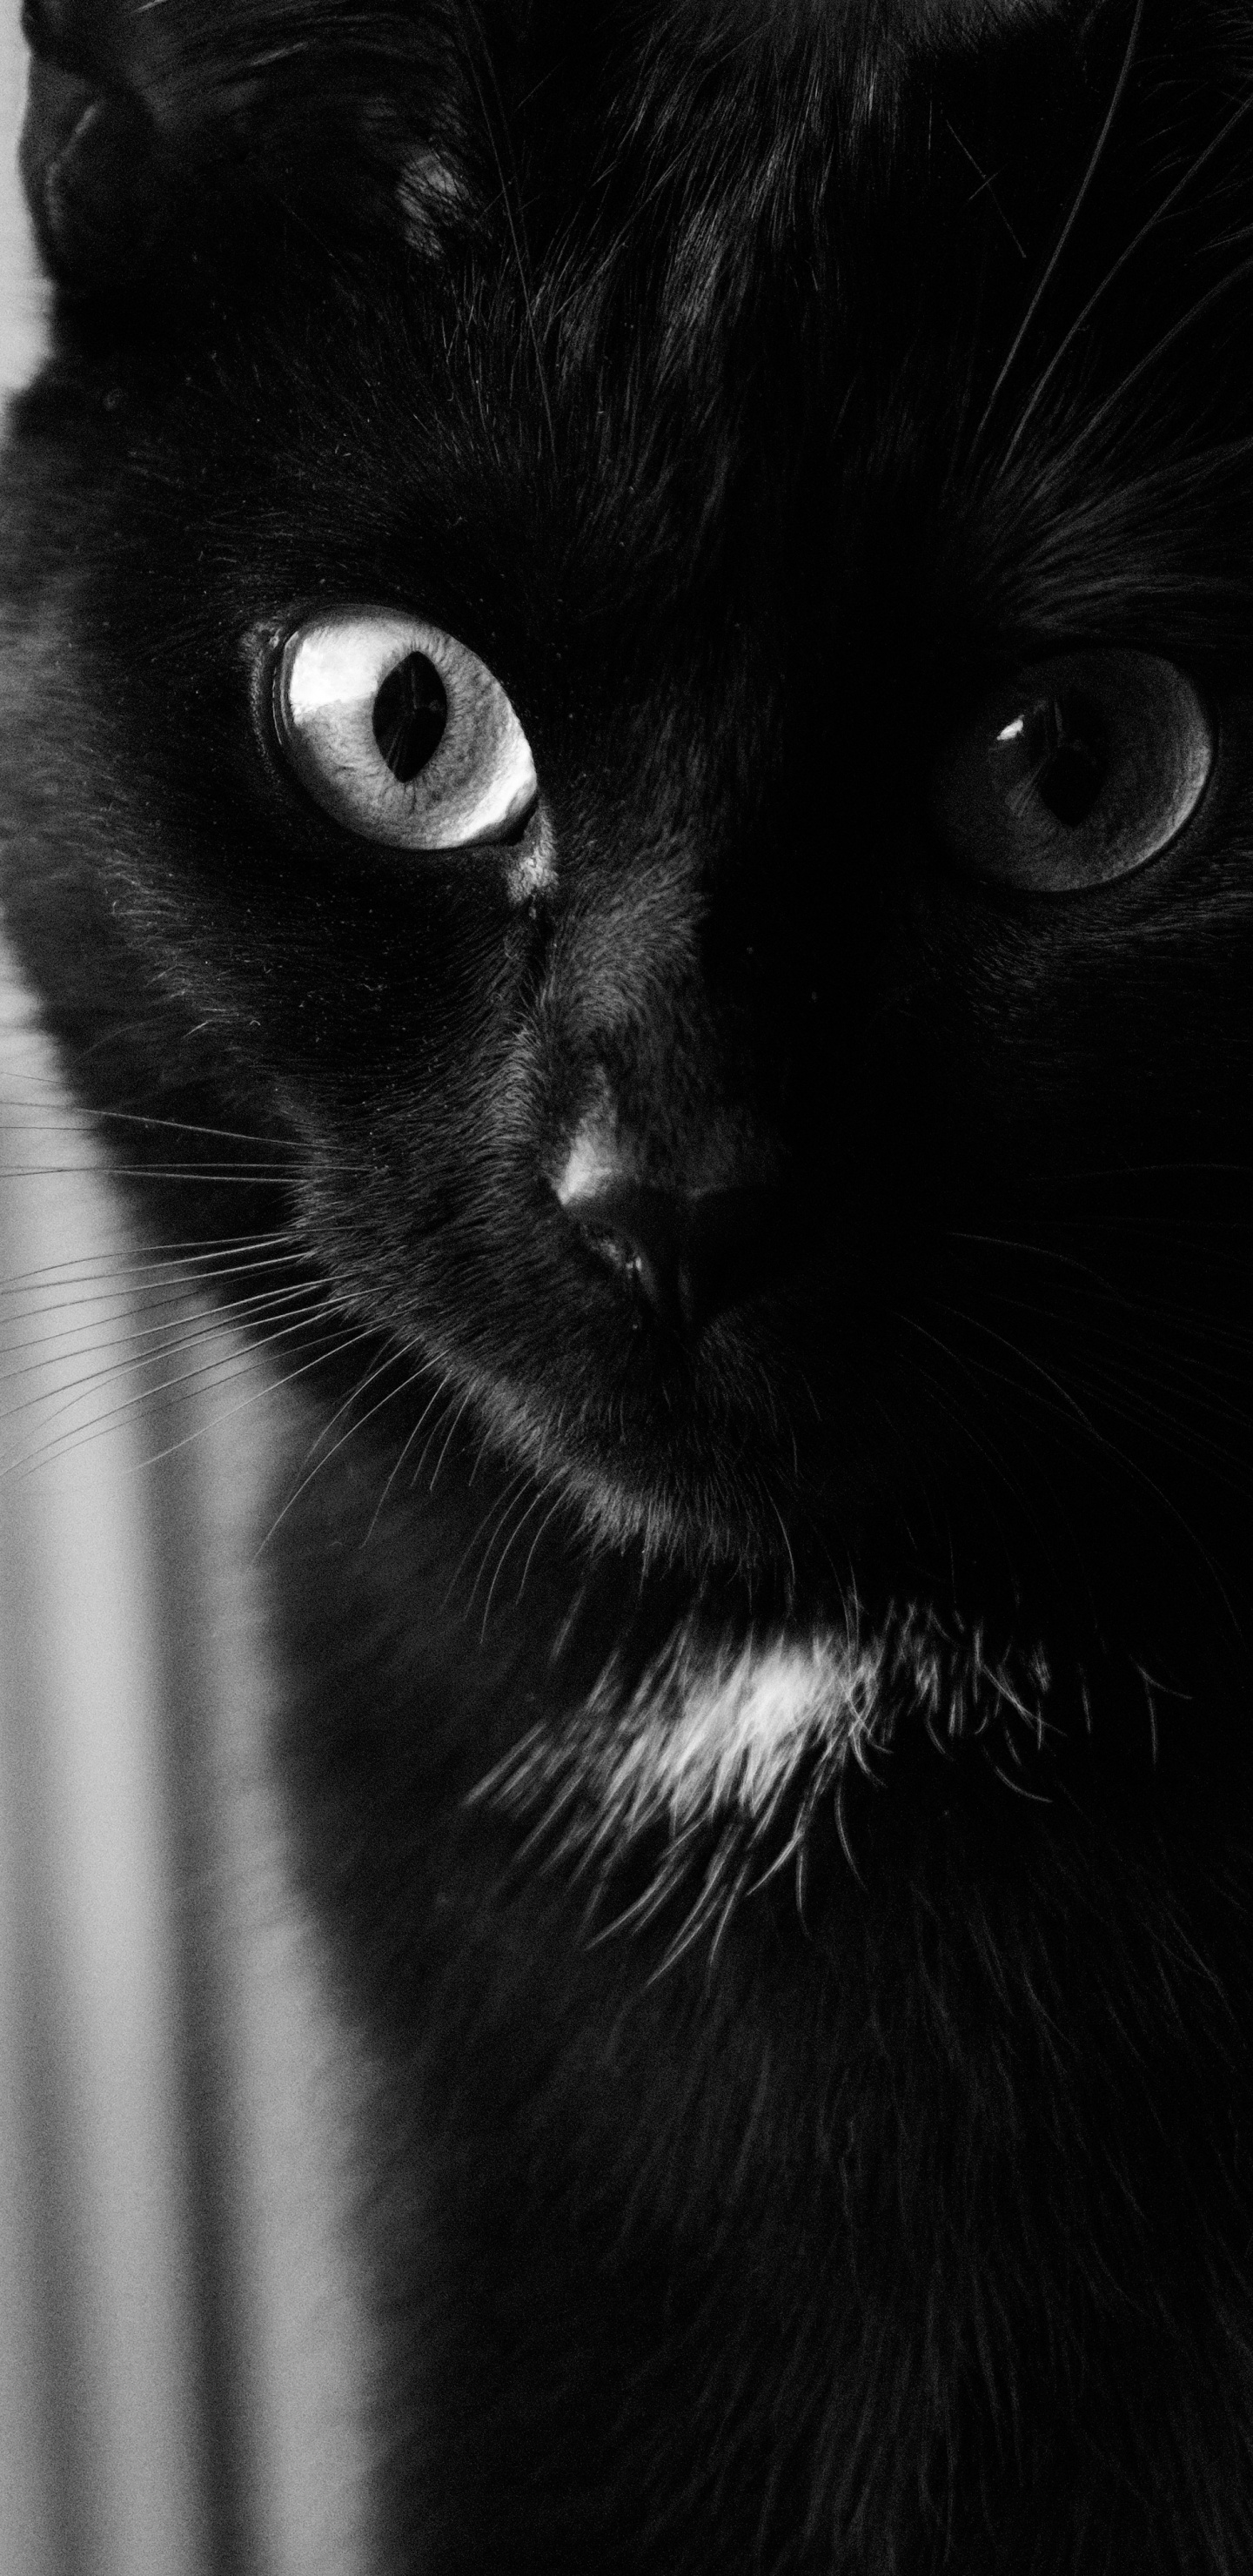 Black Cat in Grayscale Photography. Wallpaper in 1440x2960 Resolution